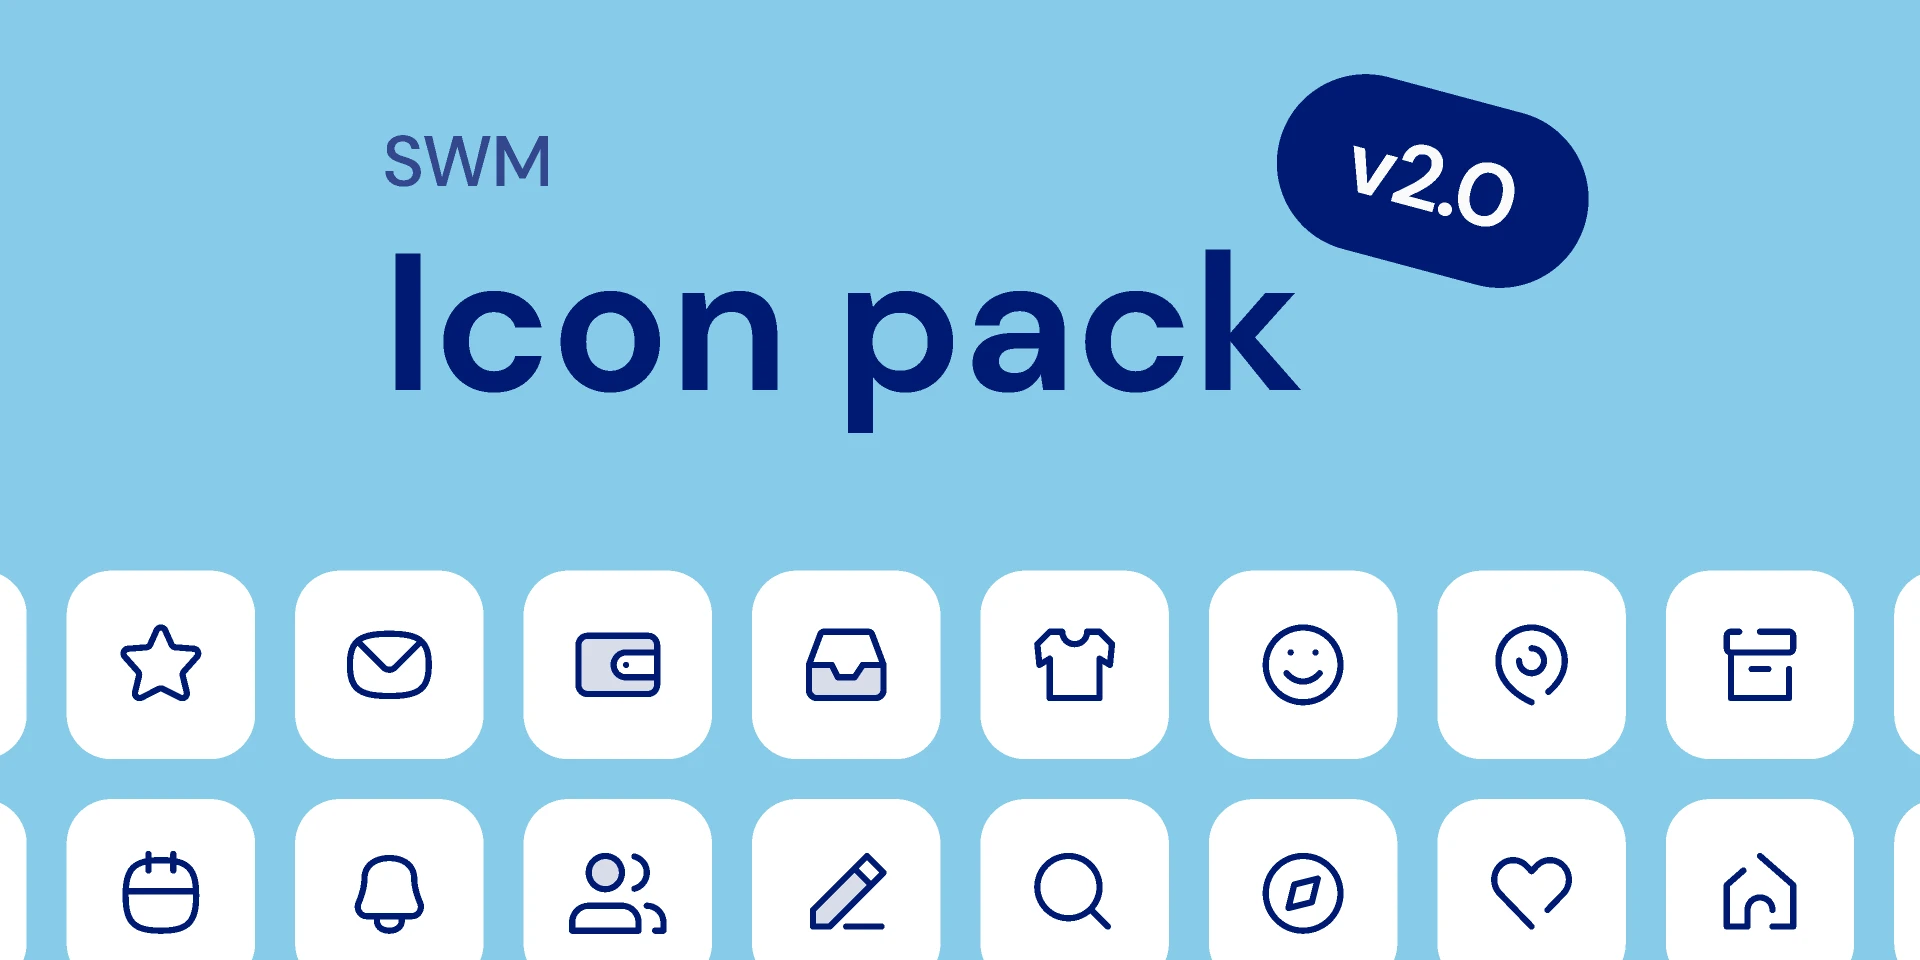 SWM Icon Pack for Figma and Adobe XD